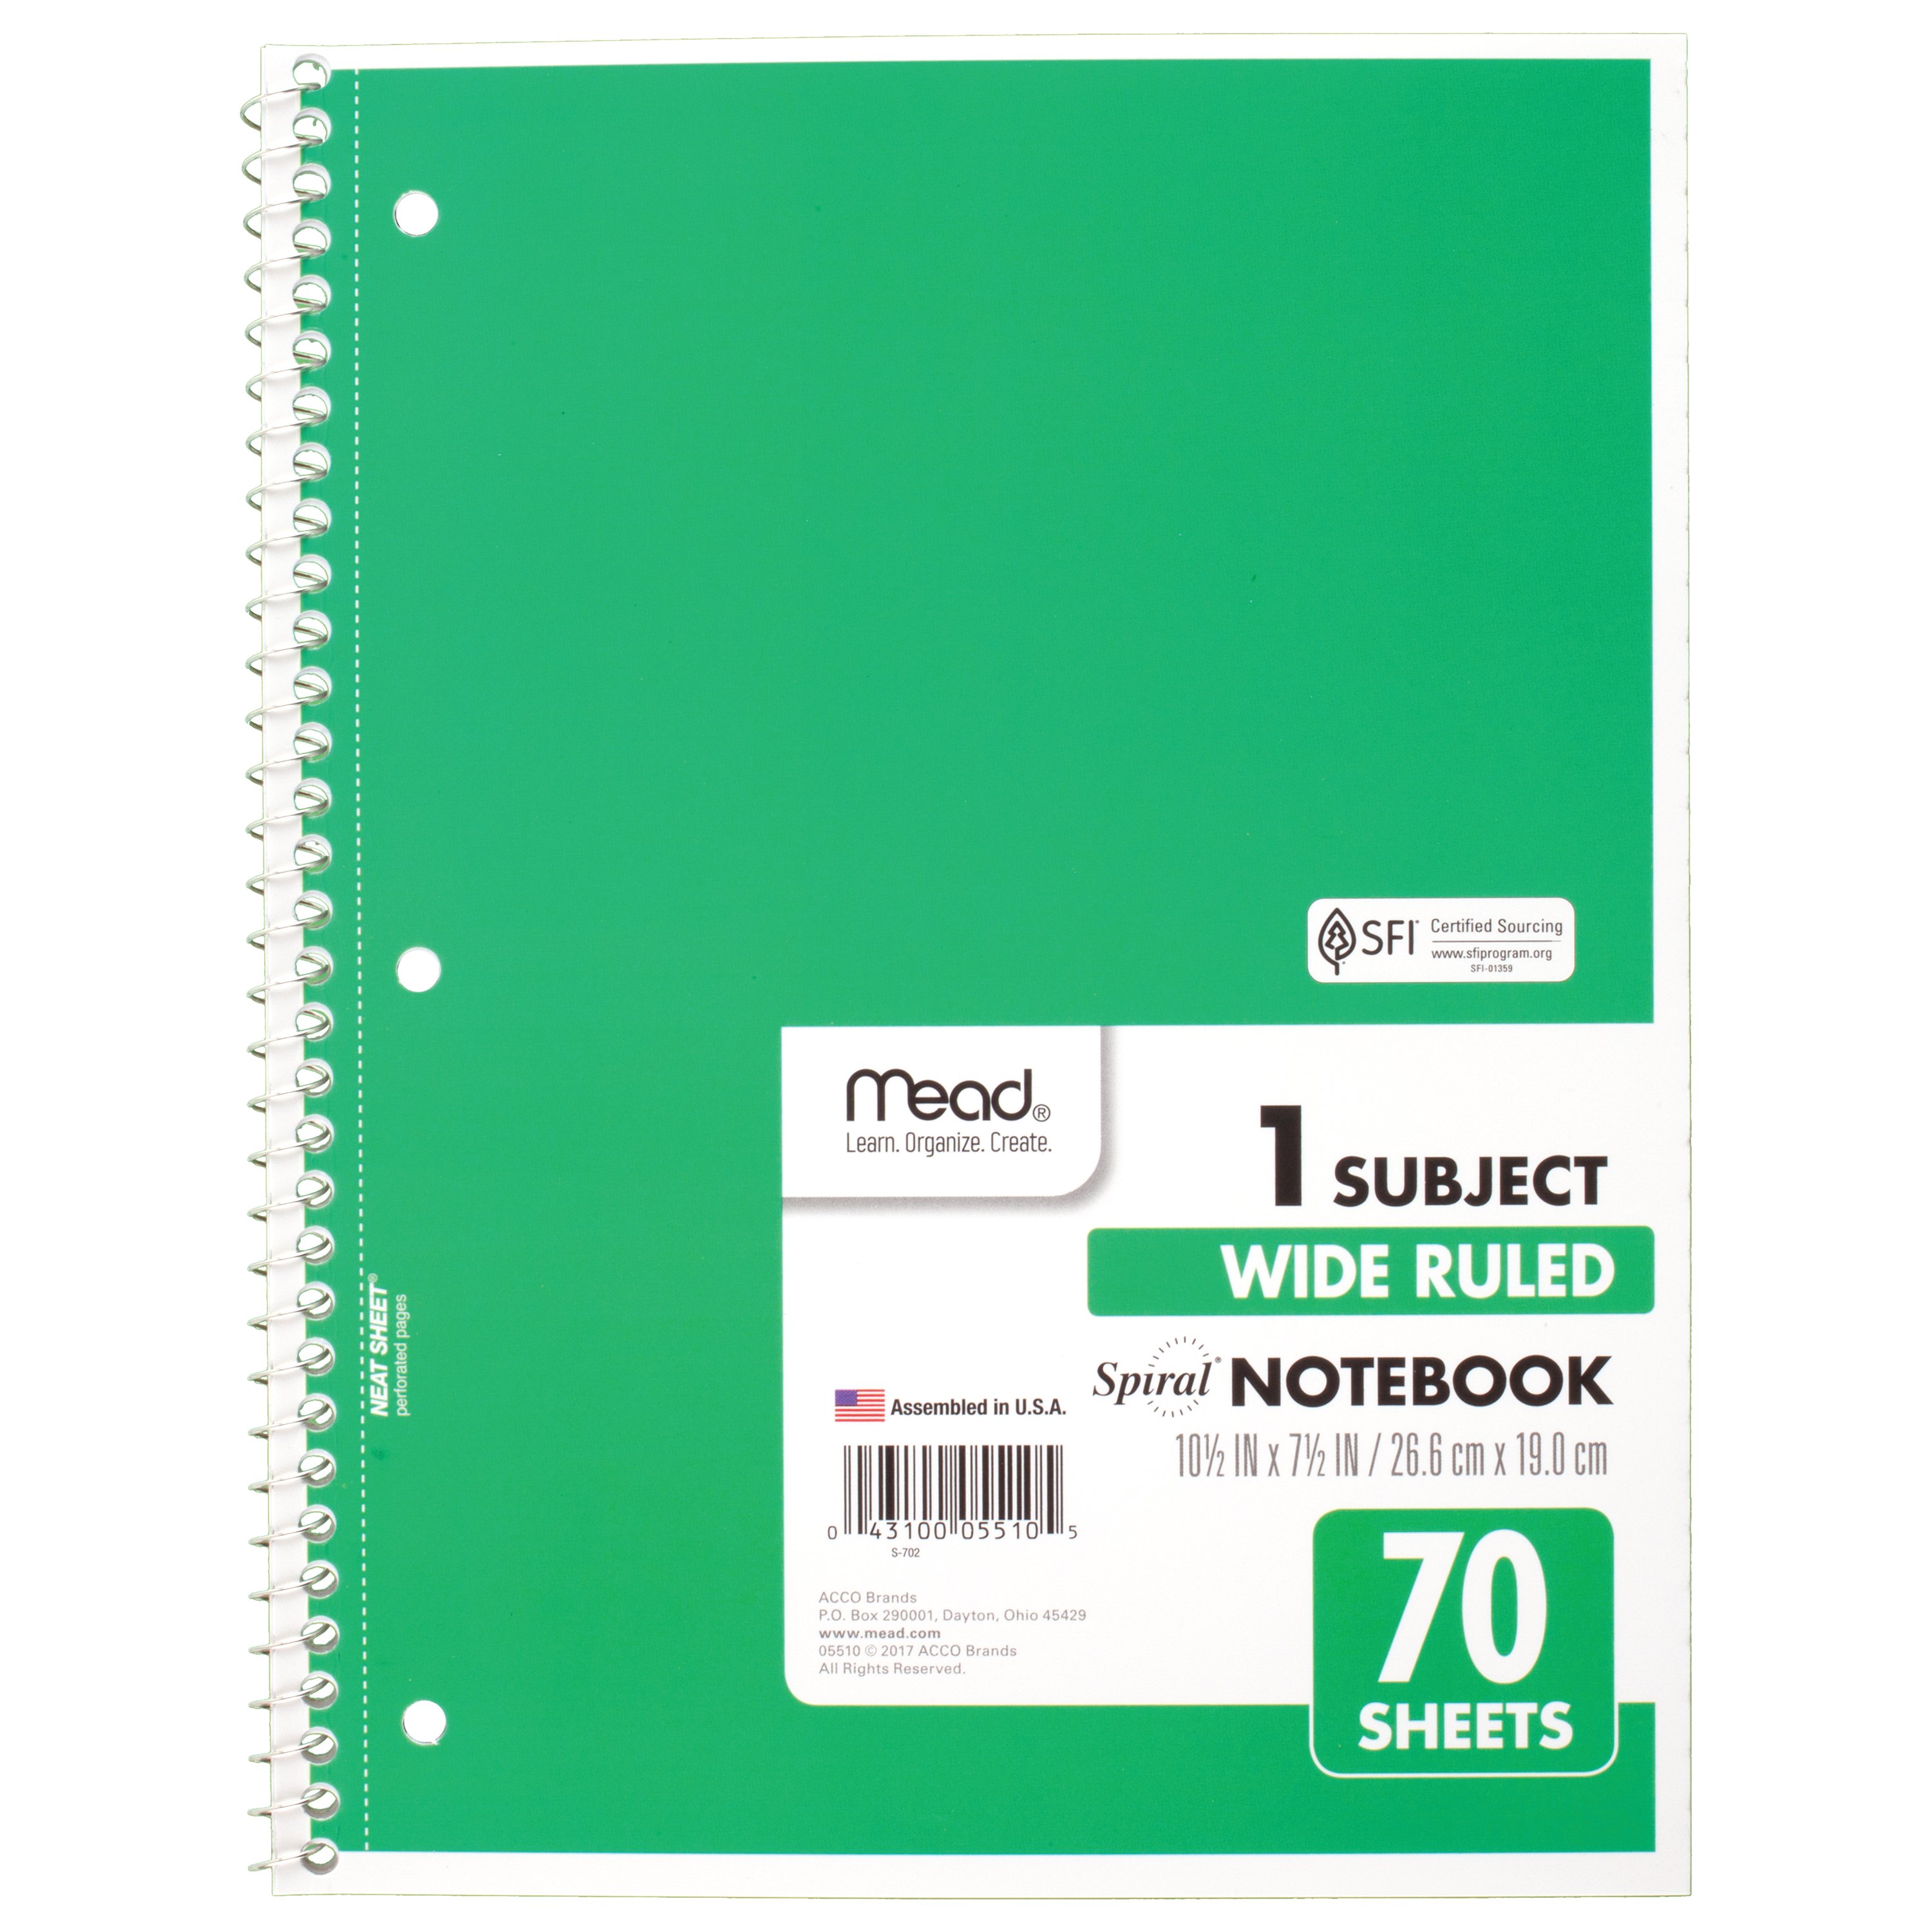 Mead Spiral 1 Subject Wide Ruled Notebook 6 Pack, Assorted Colors (73063) - image 4 of 8